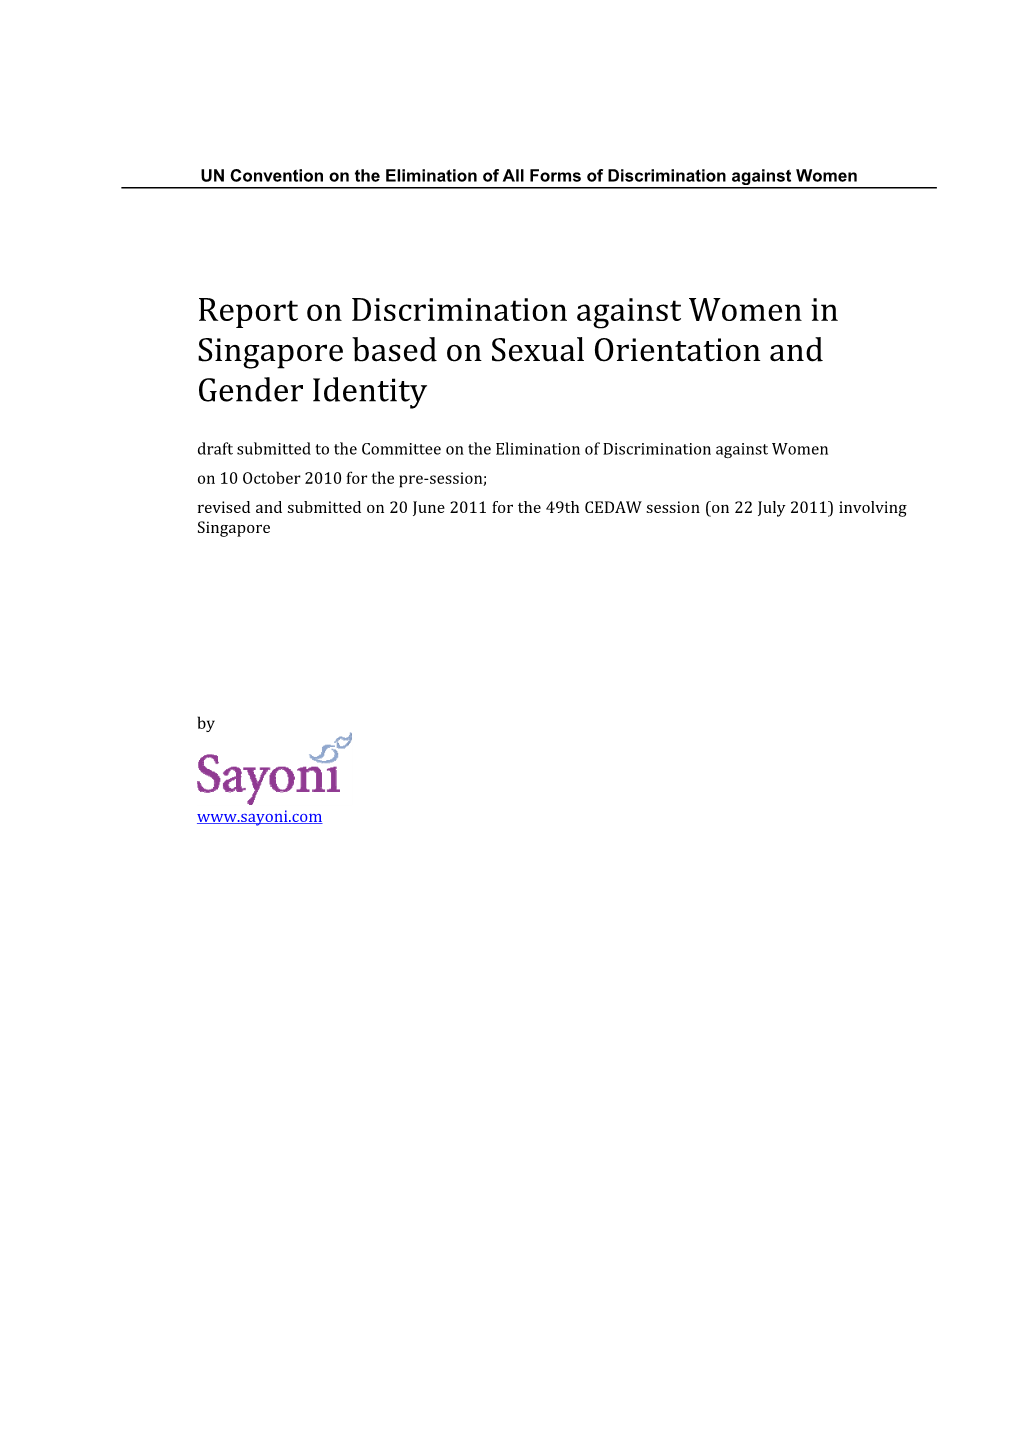 Report on Discrimination Against Women in Singapore Based on Sexual Orientation and Gender Identity